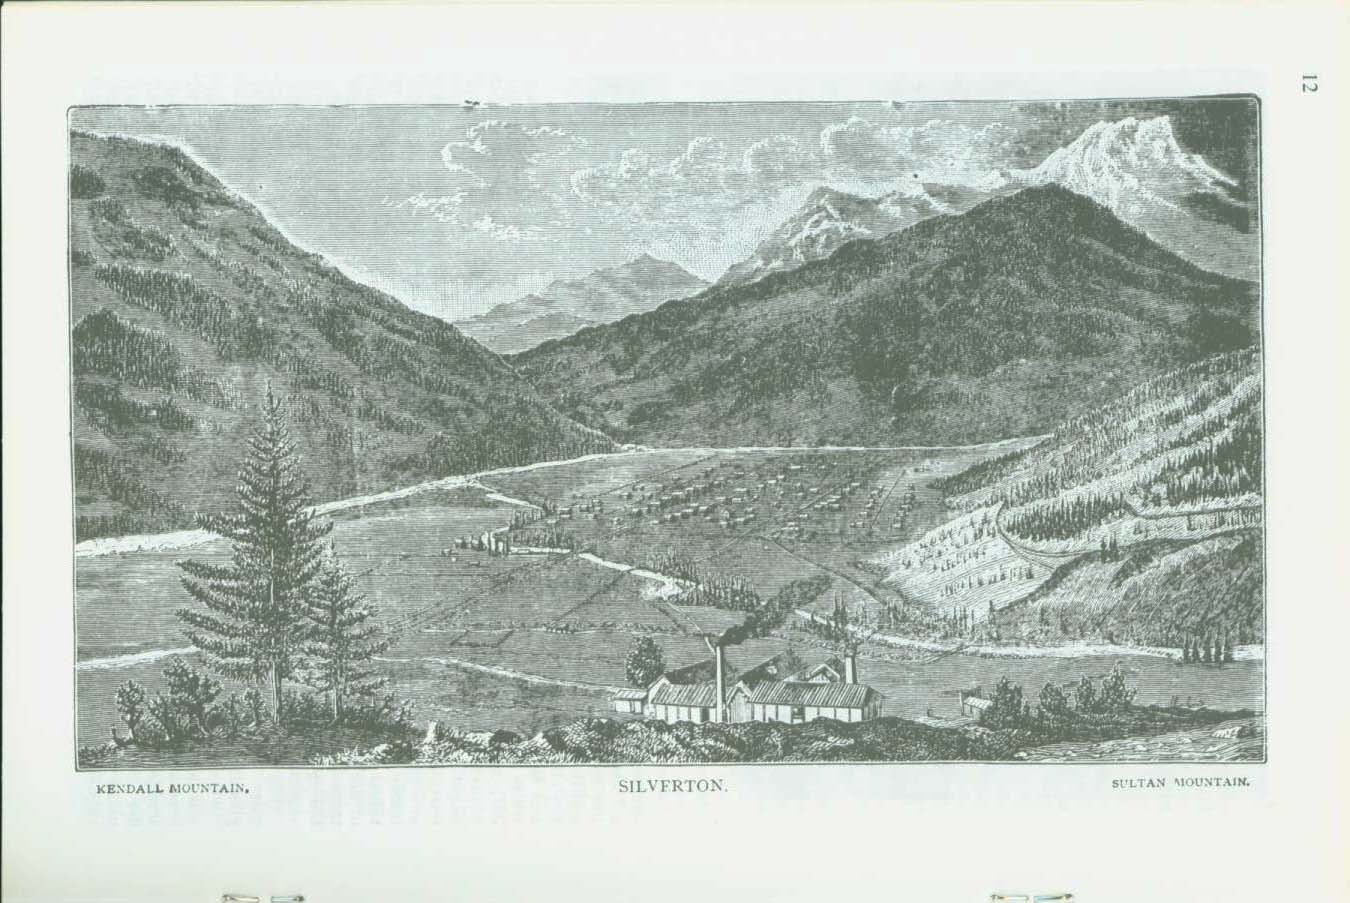 Silver San Juan: the mines and high scenery in Colorado's southwest mountains--in 1882. vist0025d